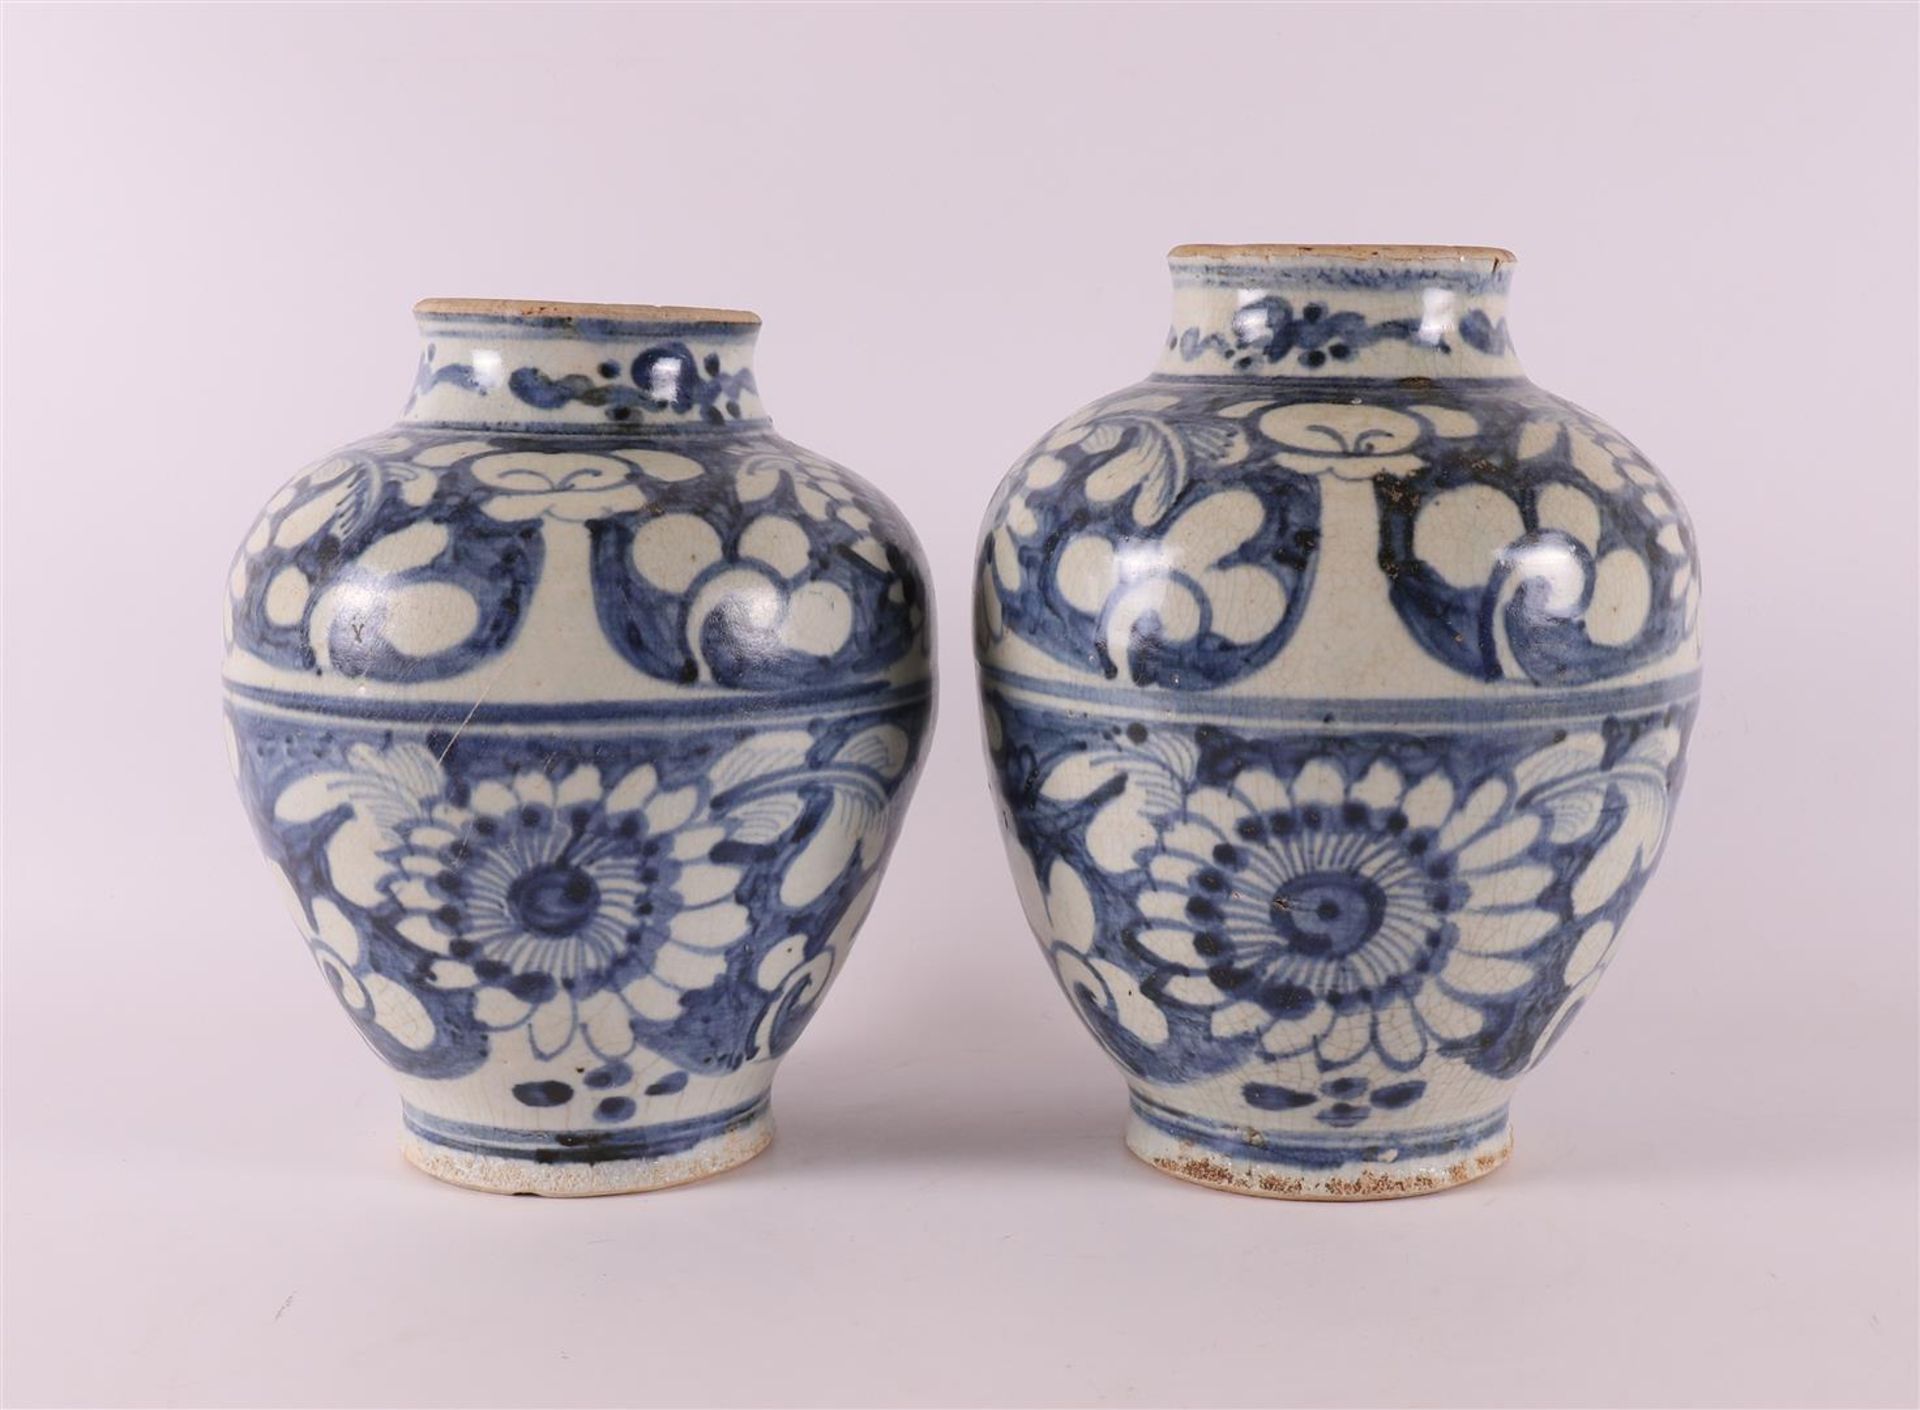 A pair of blue and white baluster-shaped porcelain Swatow vases, China, 17th/18t